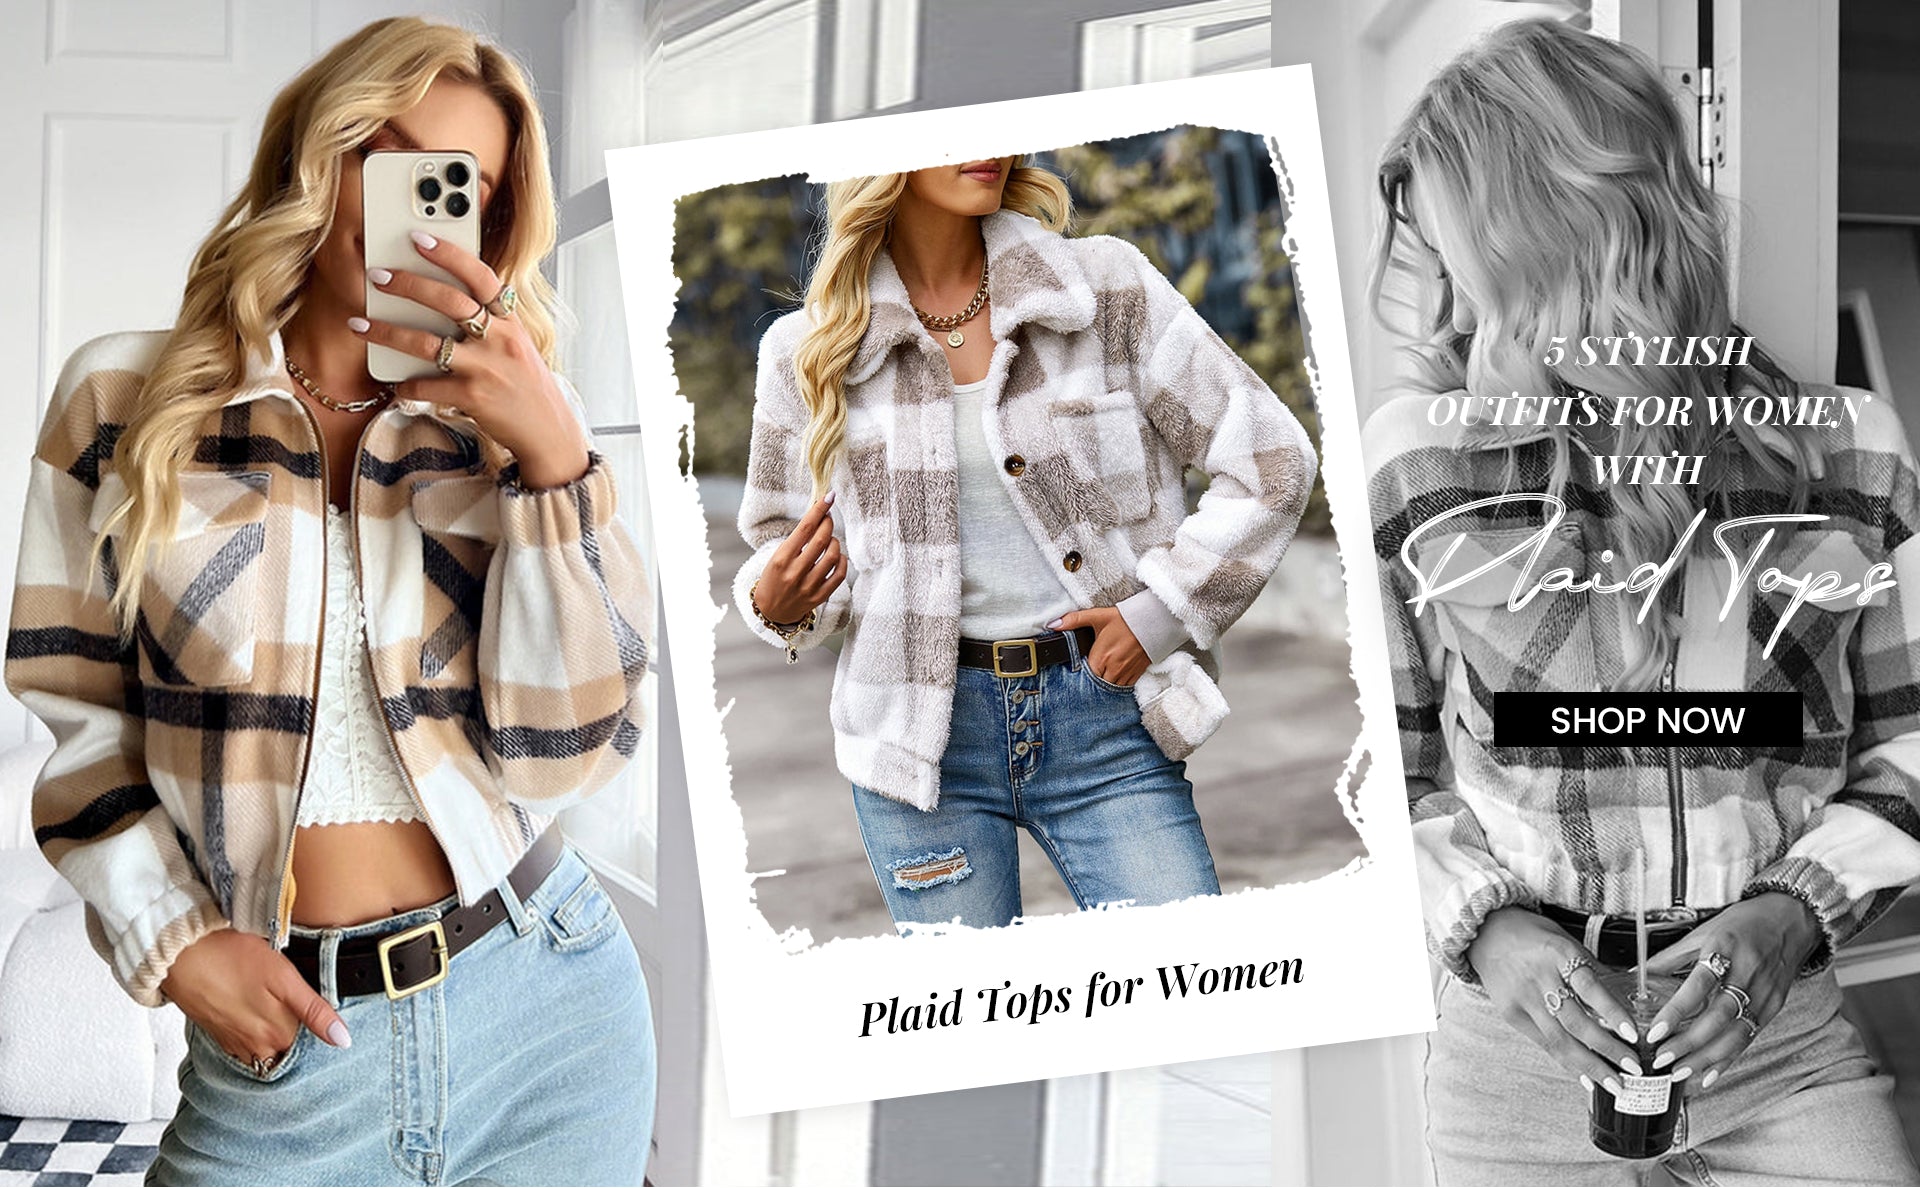 Plaid Tops for Women | 5 Stylish Outfits for Women with Plaid Tops!